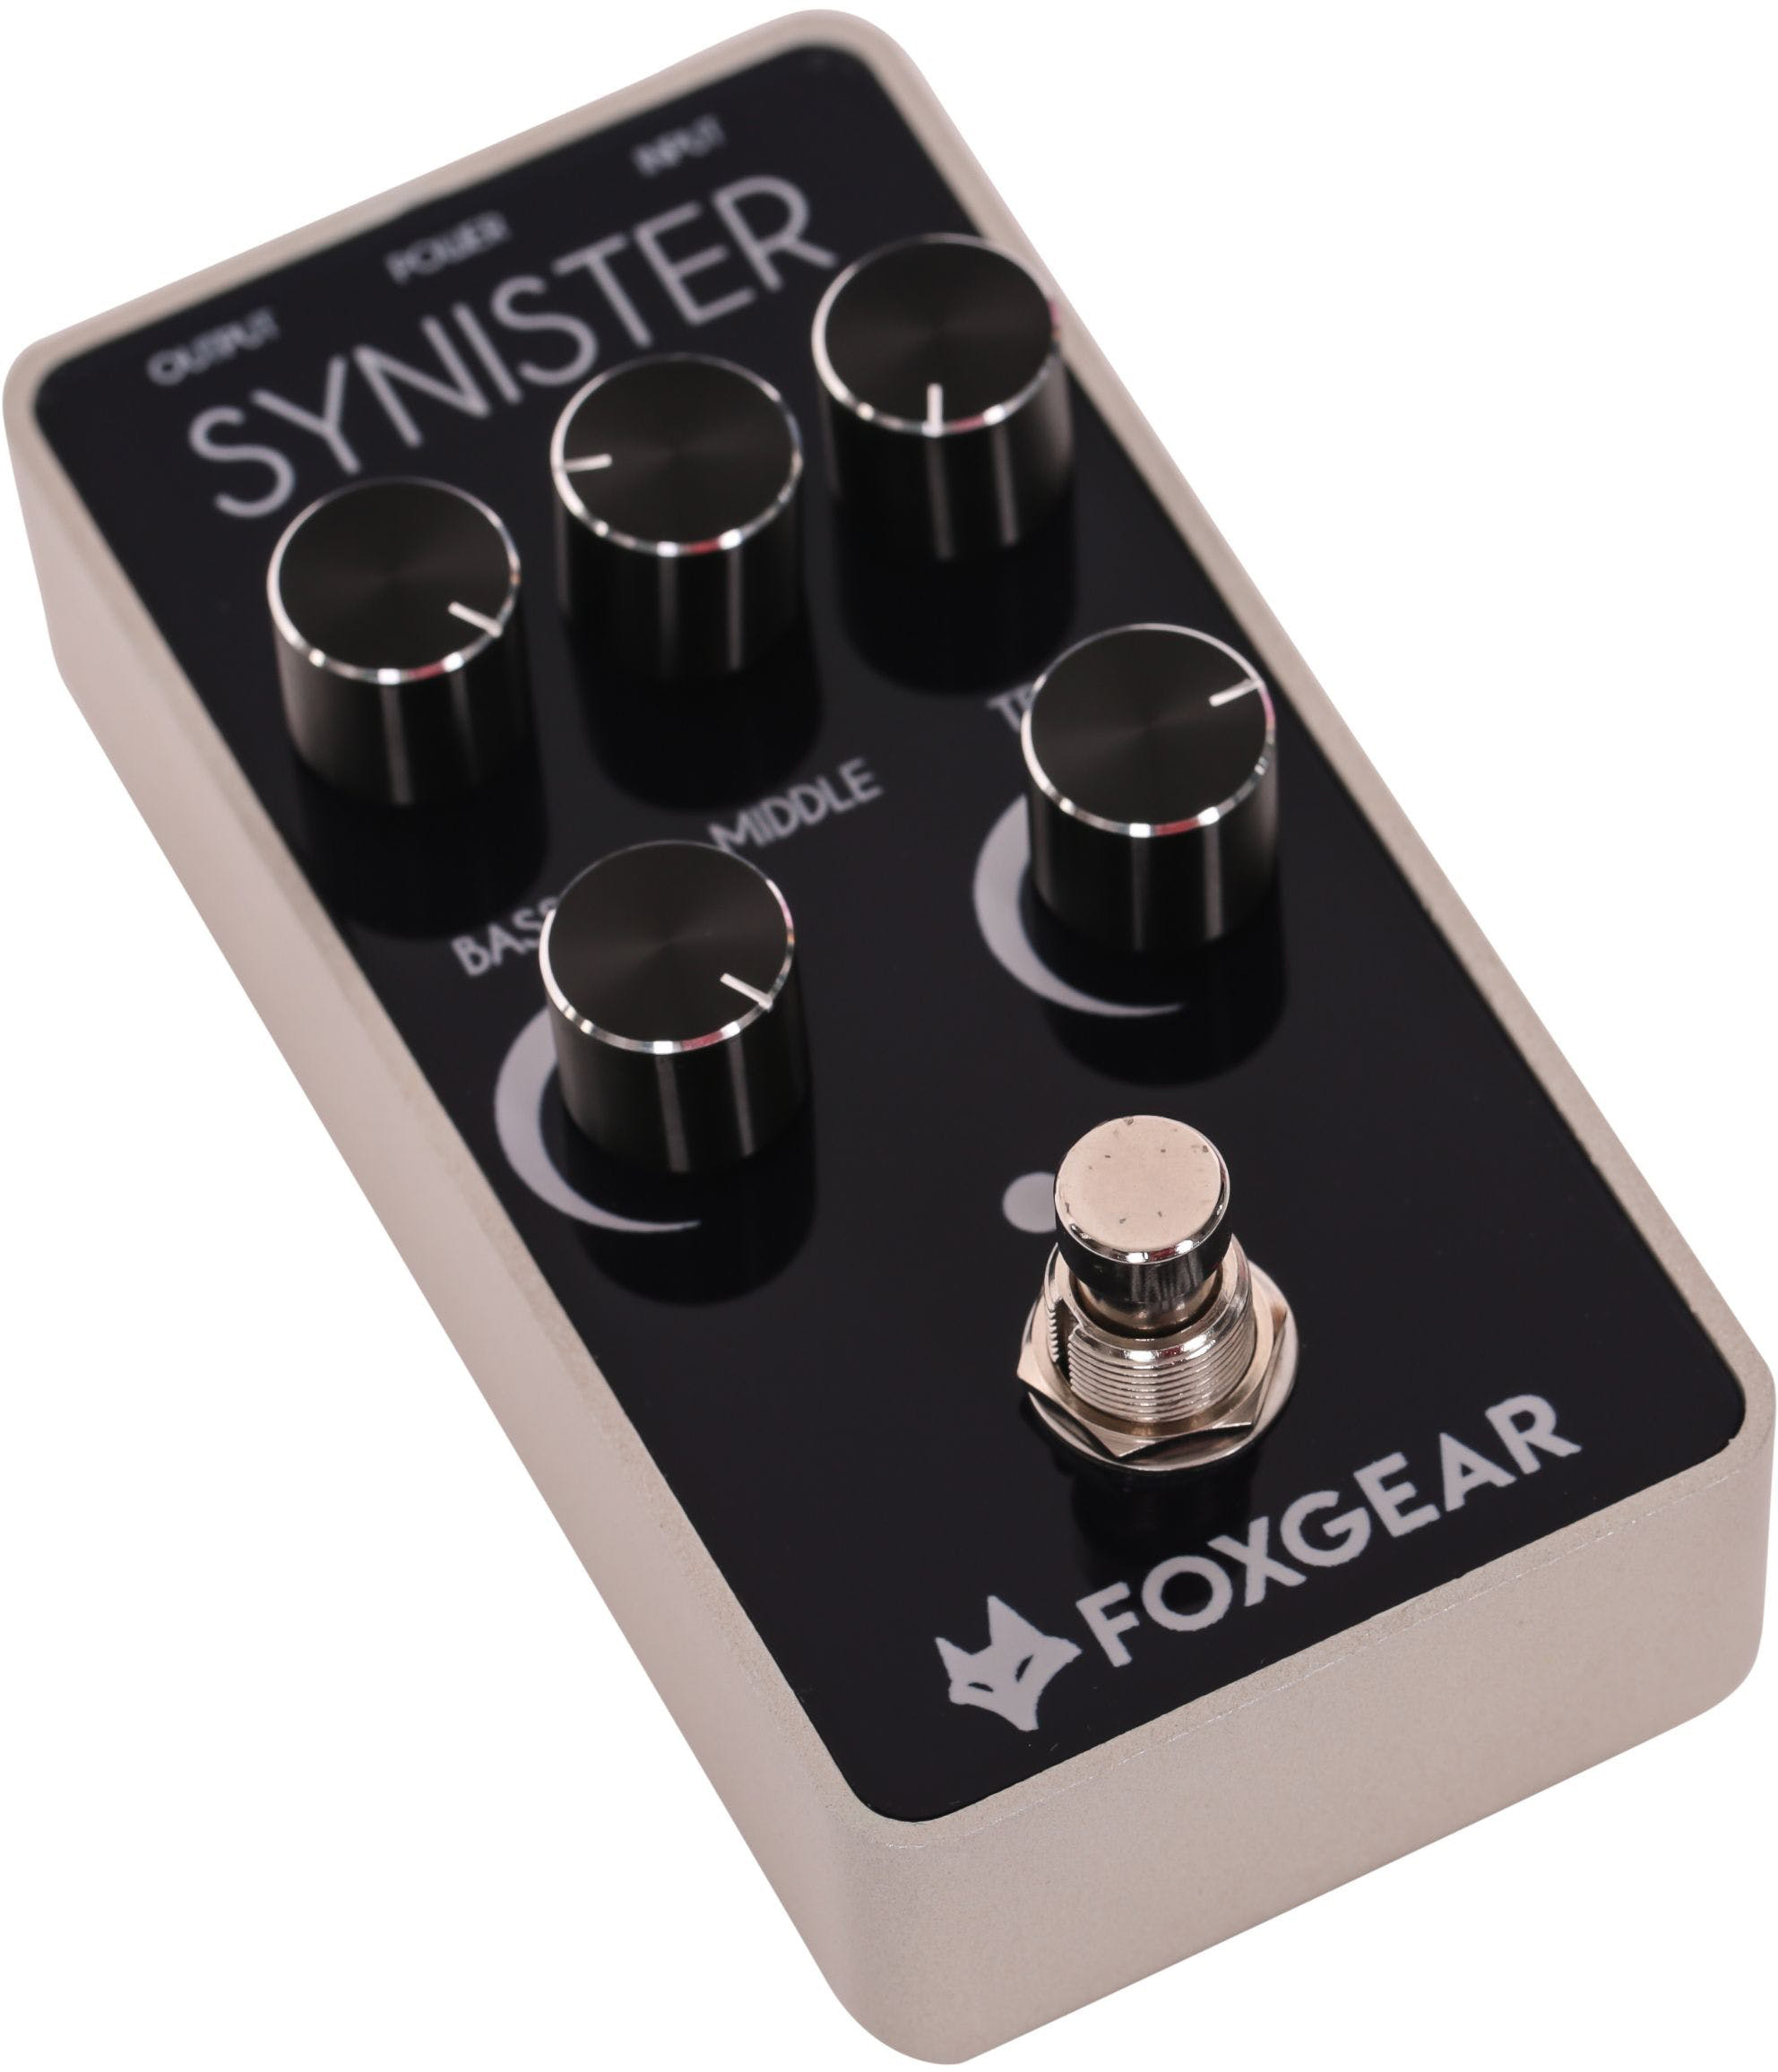 Foxgear Synister Distortion - Overdrive, distortion & fuzz effect pedal - Variation 2